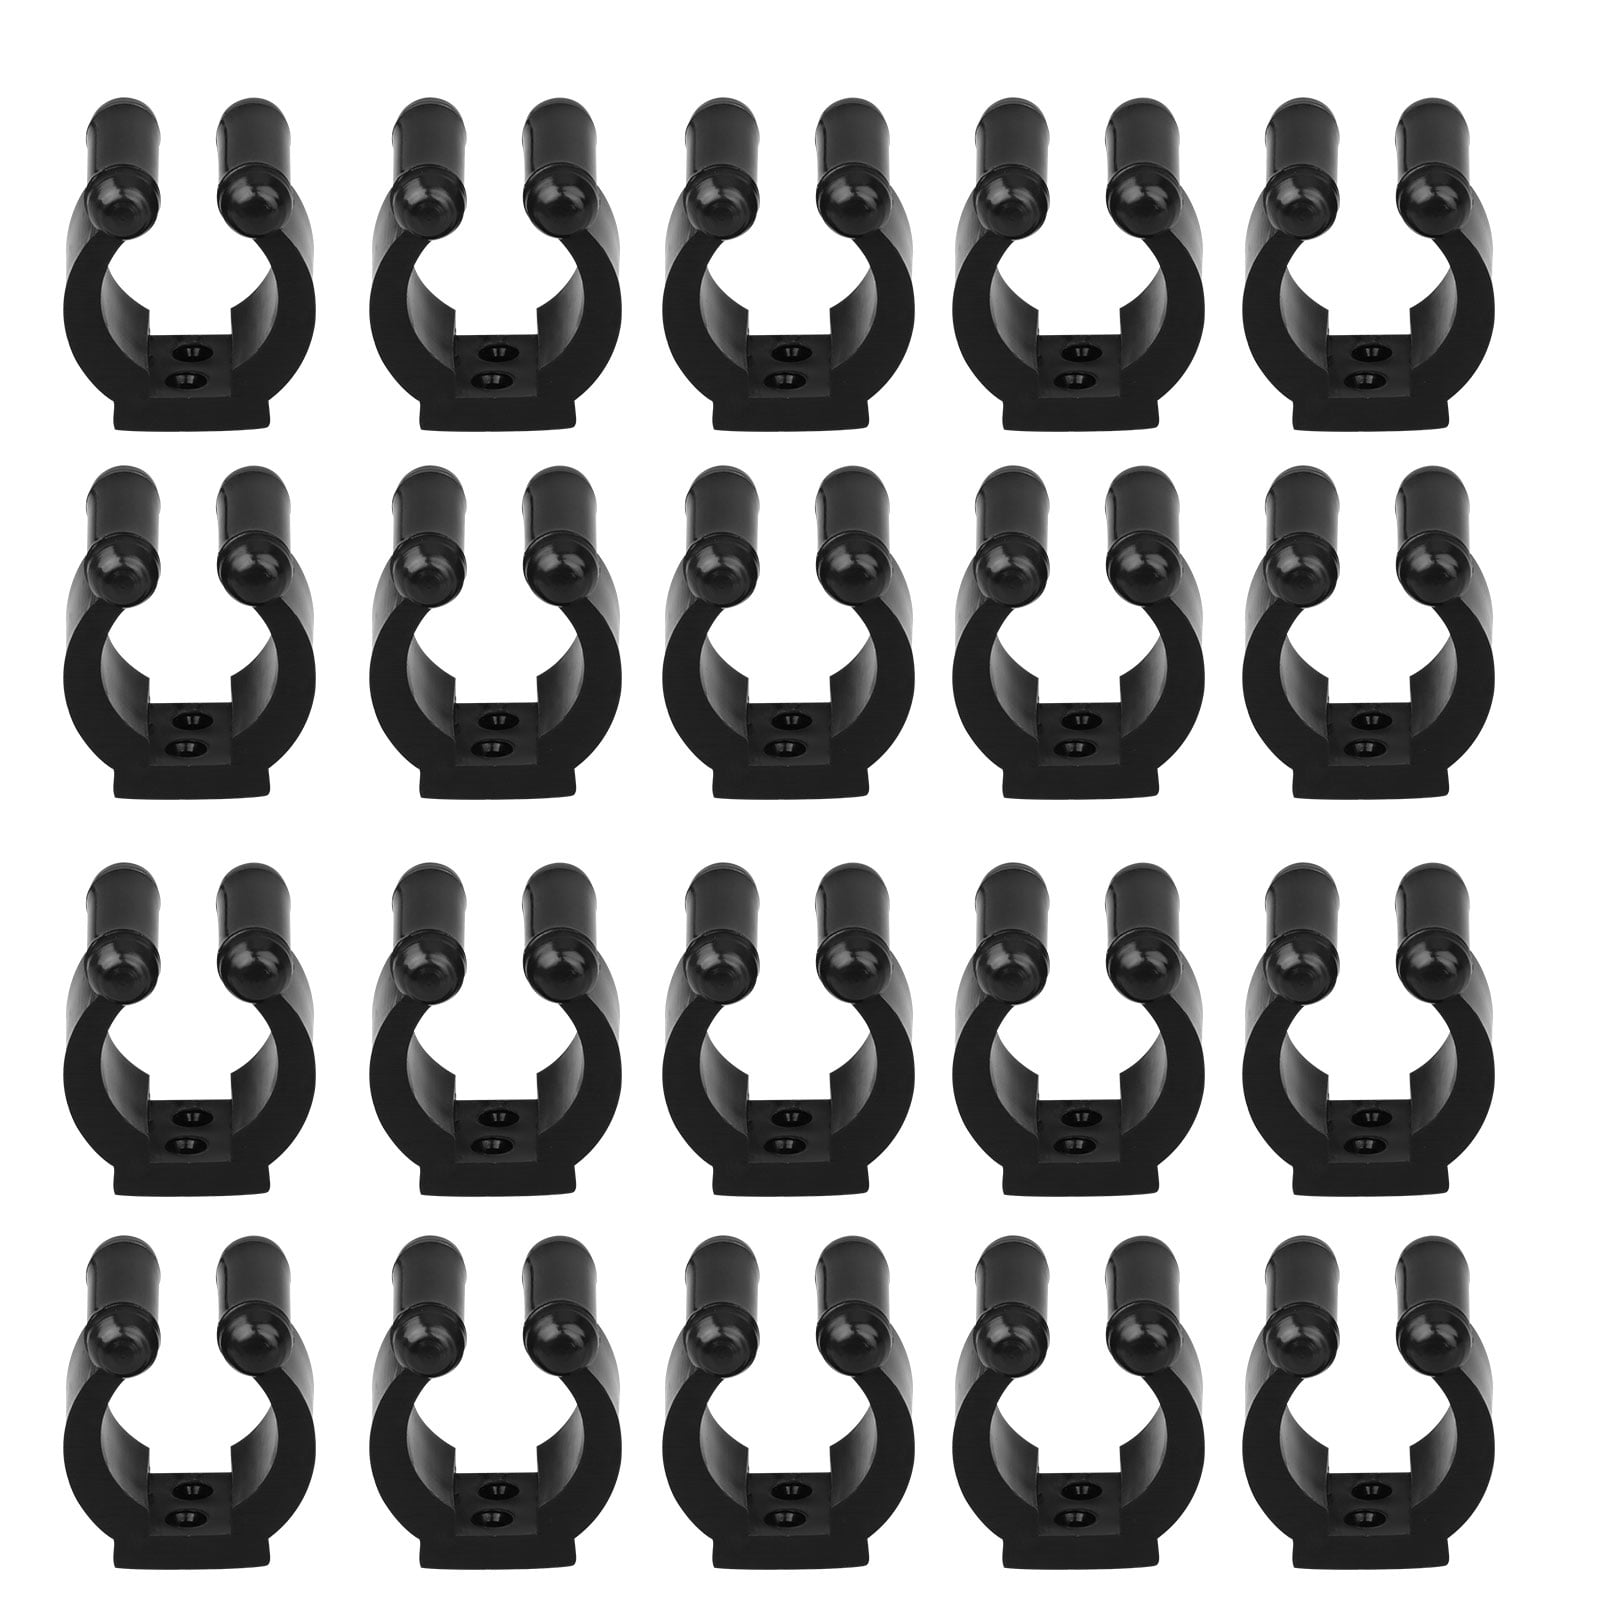  VANZACK 25 Pcs Fishing Poles Snooker Cue Locating Clip Fishing  Rod Wall Mount Wall Mount for Monitor Pool Cue Racks Tool Stand Wall Mount  Monitor Fishing Rod Rack Billiards Organizer 